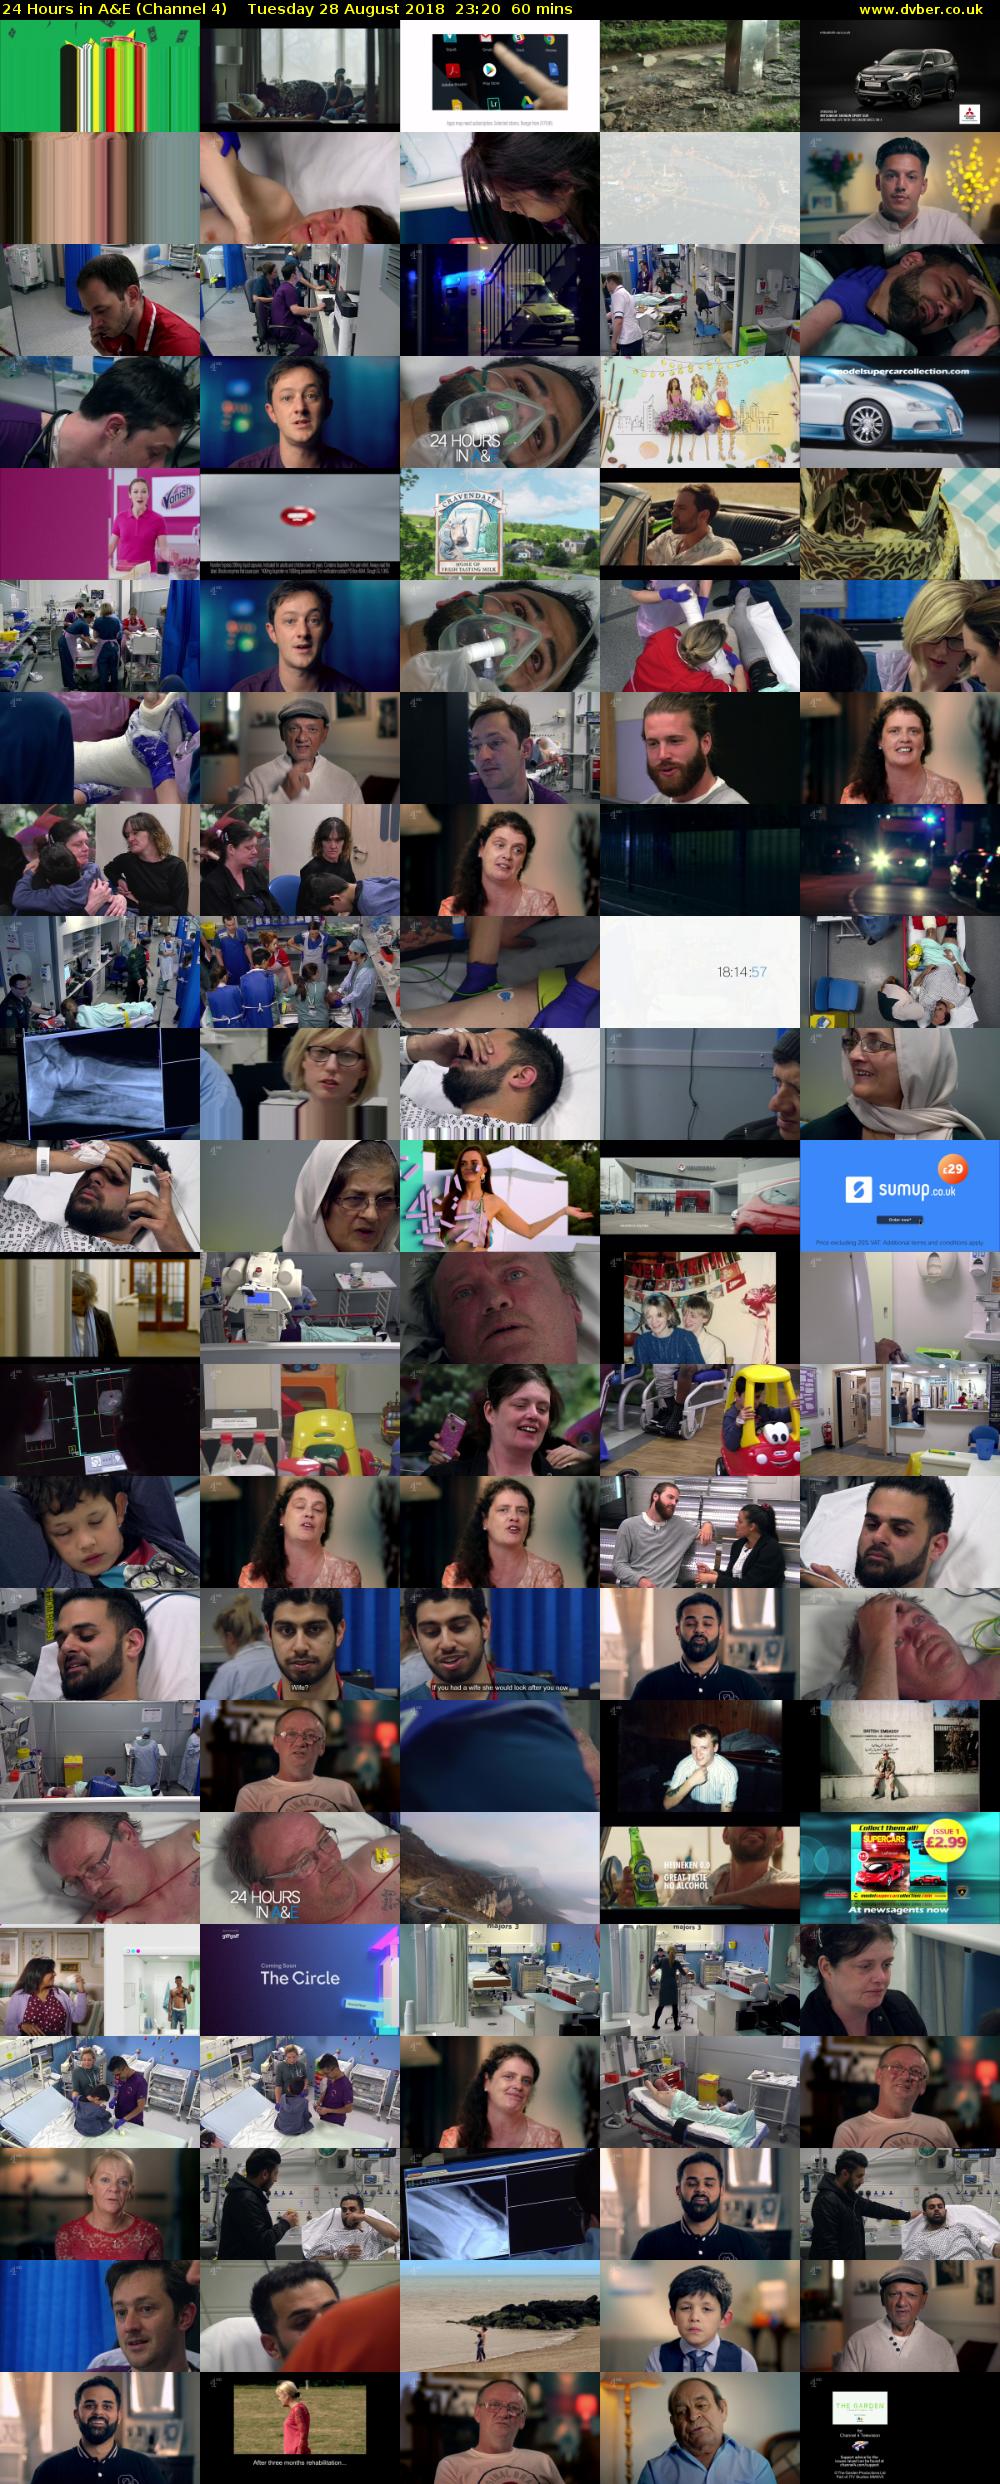 24 Hours in A&E (Channel 4) Tuesday 28 August 2018 23:20 - 00:20